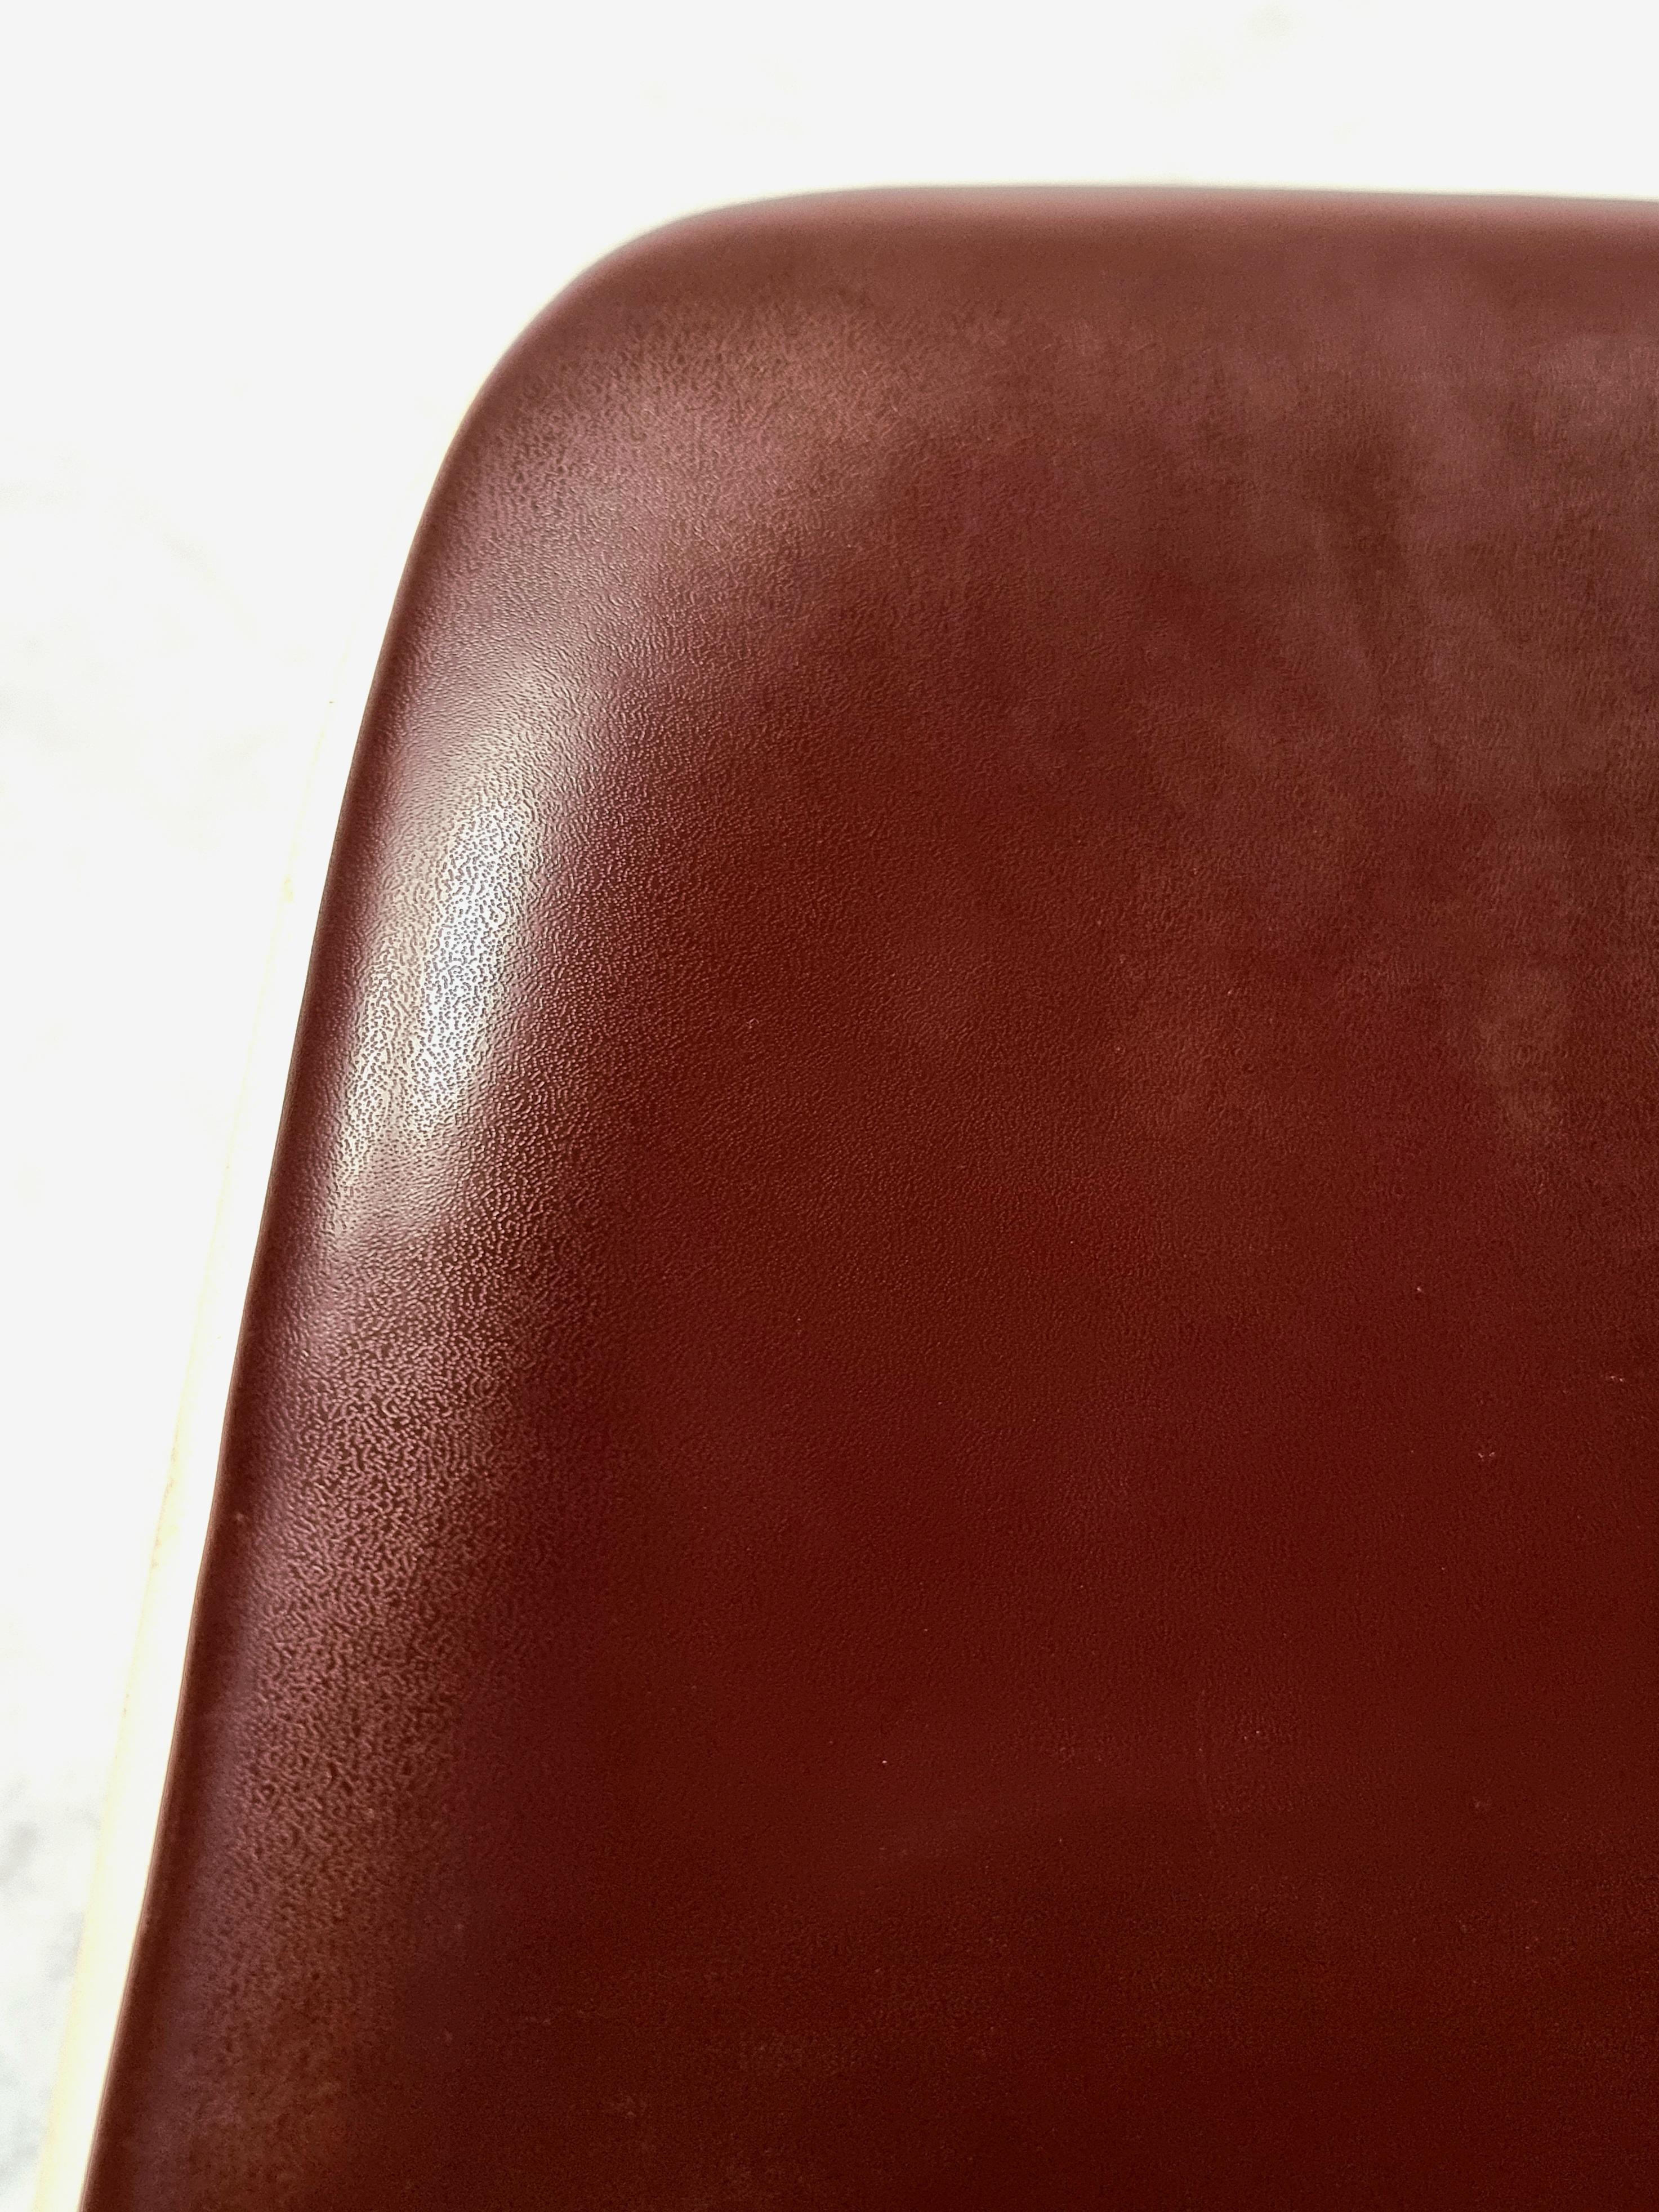 Steel Office Chair By Charles And Ray Eames For Herman Miller - Fiberglass - Ca 1960 For Sale